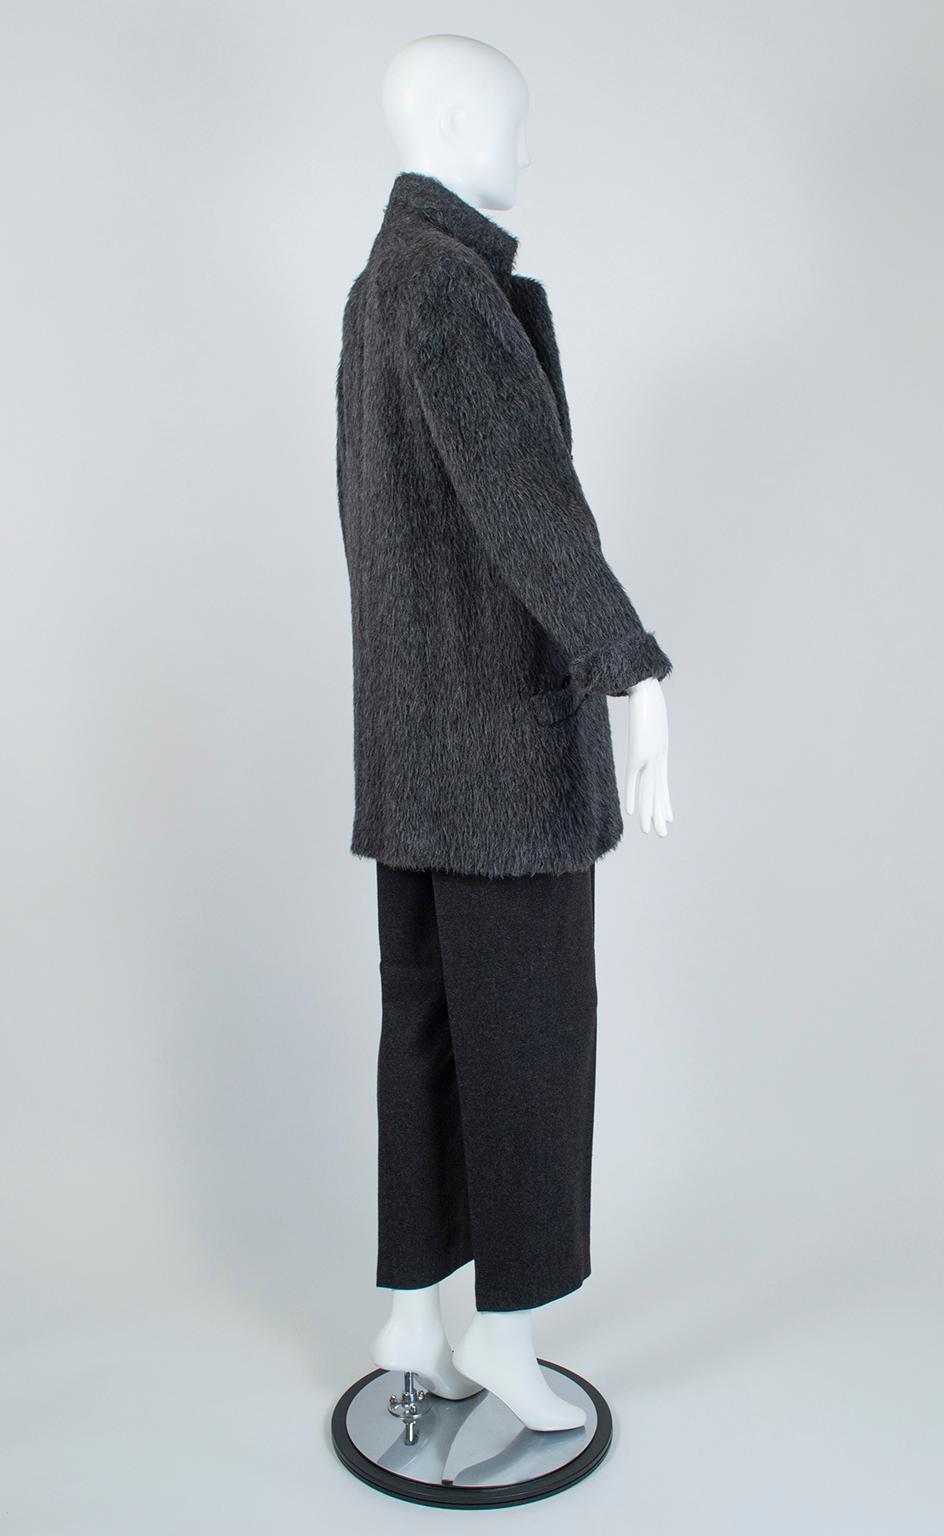 Like David Byrne’s “Big Suit” from the 1980s, this oversized suit makes a powerful statement despite its crisp, minimalist silhouette. Fuzzy, warm and richly textured, the jacket dominates the ensemble with its broad shoulders and long lines, while